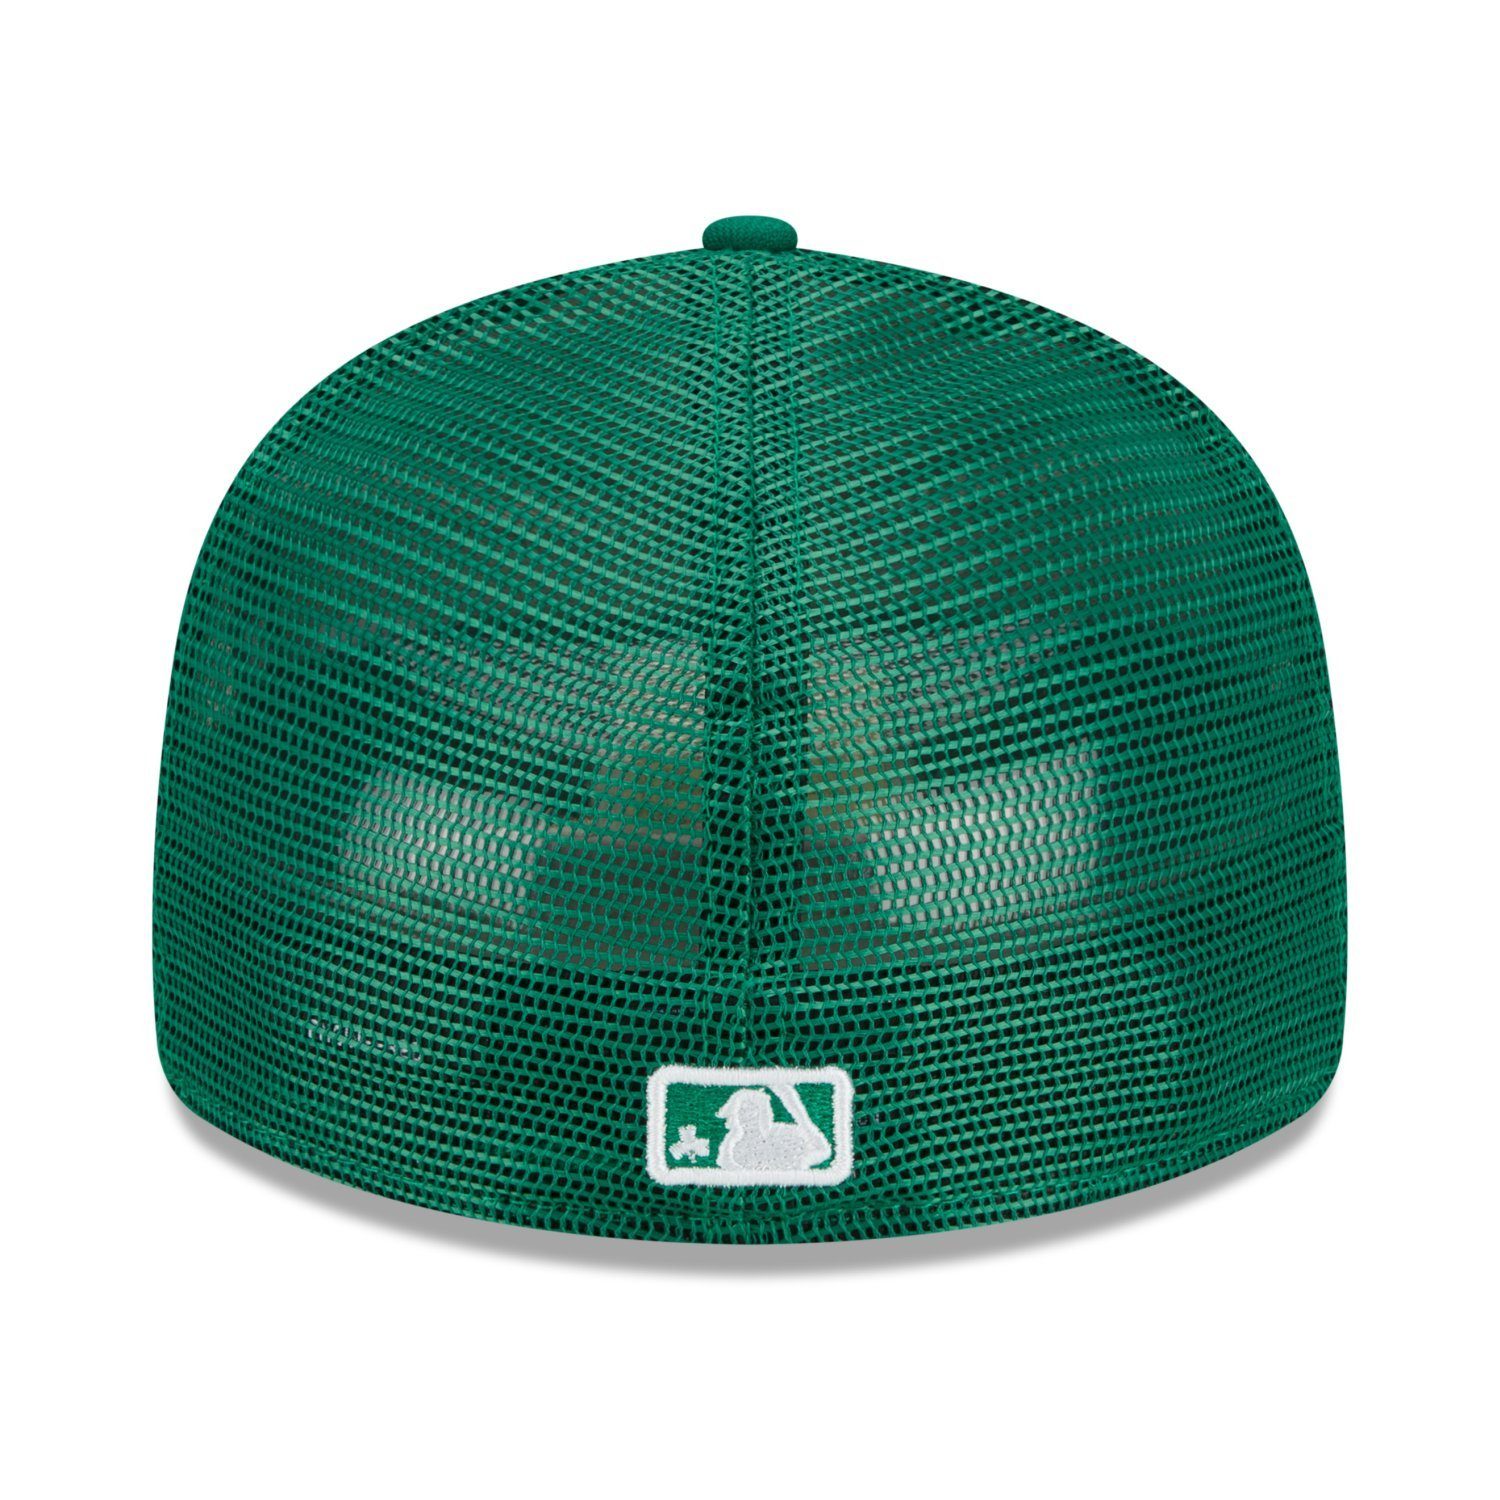 New Era Fitted PATRICK’S DAY Profile York Low 59Fifty Cap ST. New